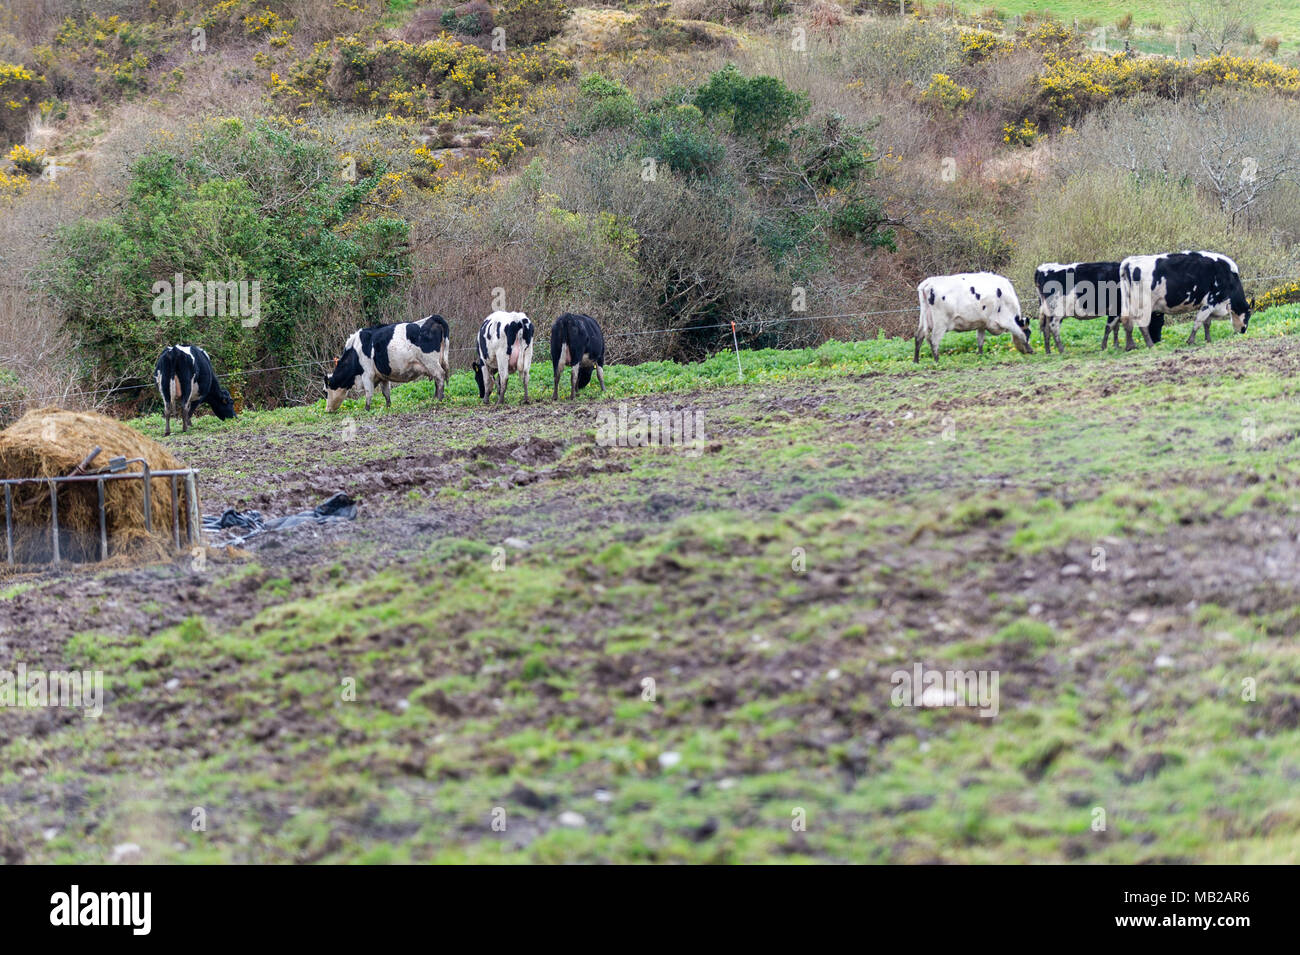 Ballydehob, Ireland. 6th Apr, 2018. A herd of dairy cows attempt to eat what little grass there is left in a field of mud, due to the ongoing fodder crisis in Ireland.  The poor weather has led to no grass growth with fodder having to be imported from the UK to help desperate farmers. Credit: Andy Gibson/Alamy Live News. Stock Photo